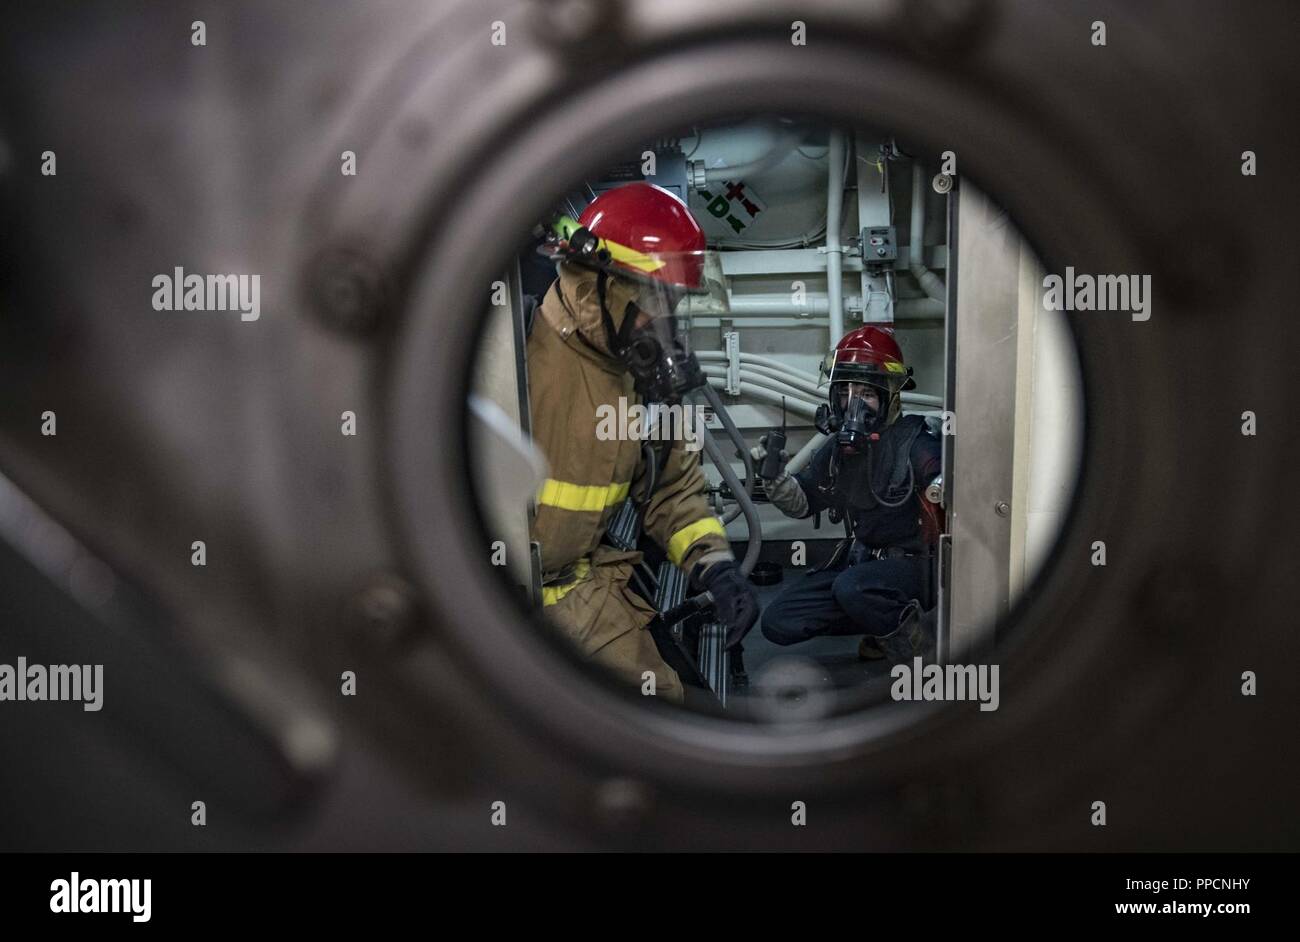 SEA (Aug. 31, 2018) Sailors prepare to combat simulated casualties during a general quarters drill aboard the Arleigh Burke-class guided-missile destroyer USS Carney (DDG 64) Aug. 31, 2018. Carney, forward-deployed to Rota, Spain, is on its fifth patrol in the U.S. 6th Fleet area of operations in support of regional allies and partners as well as U.S. national security interests in Europe and Africa. Stock Photo